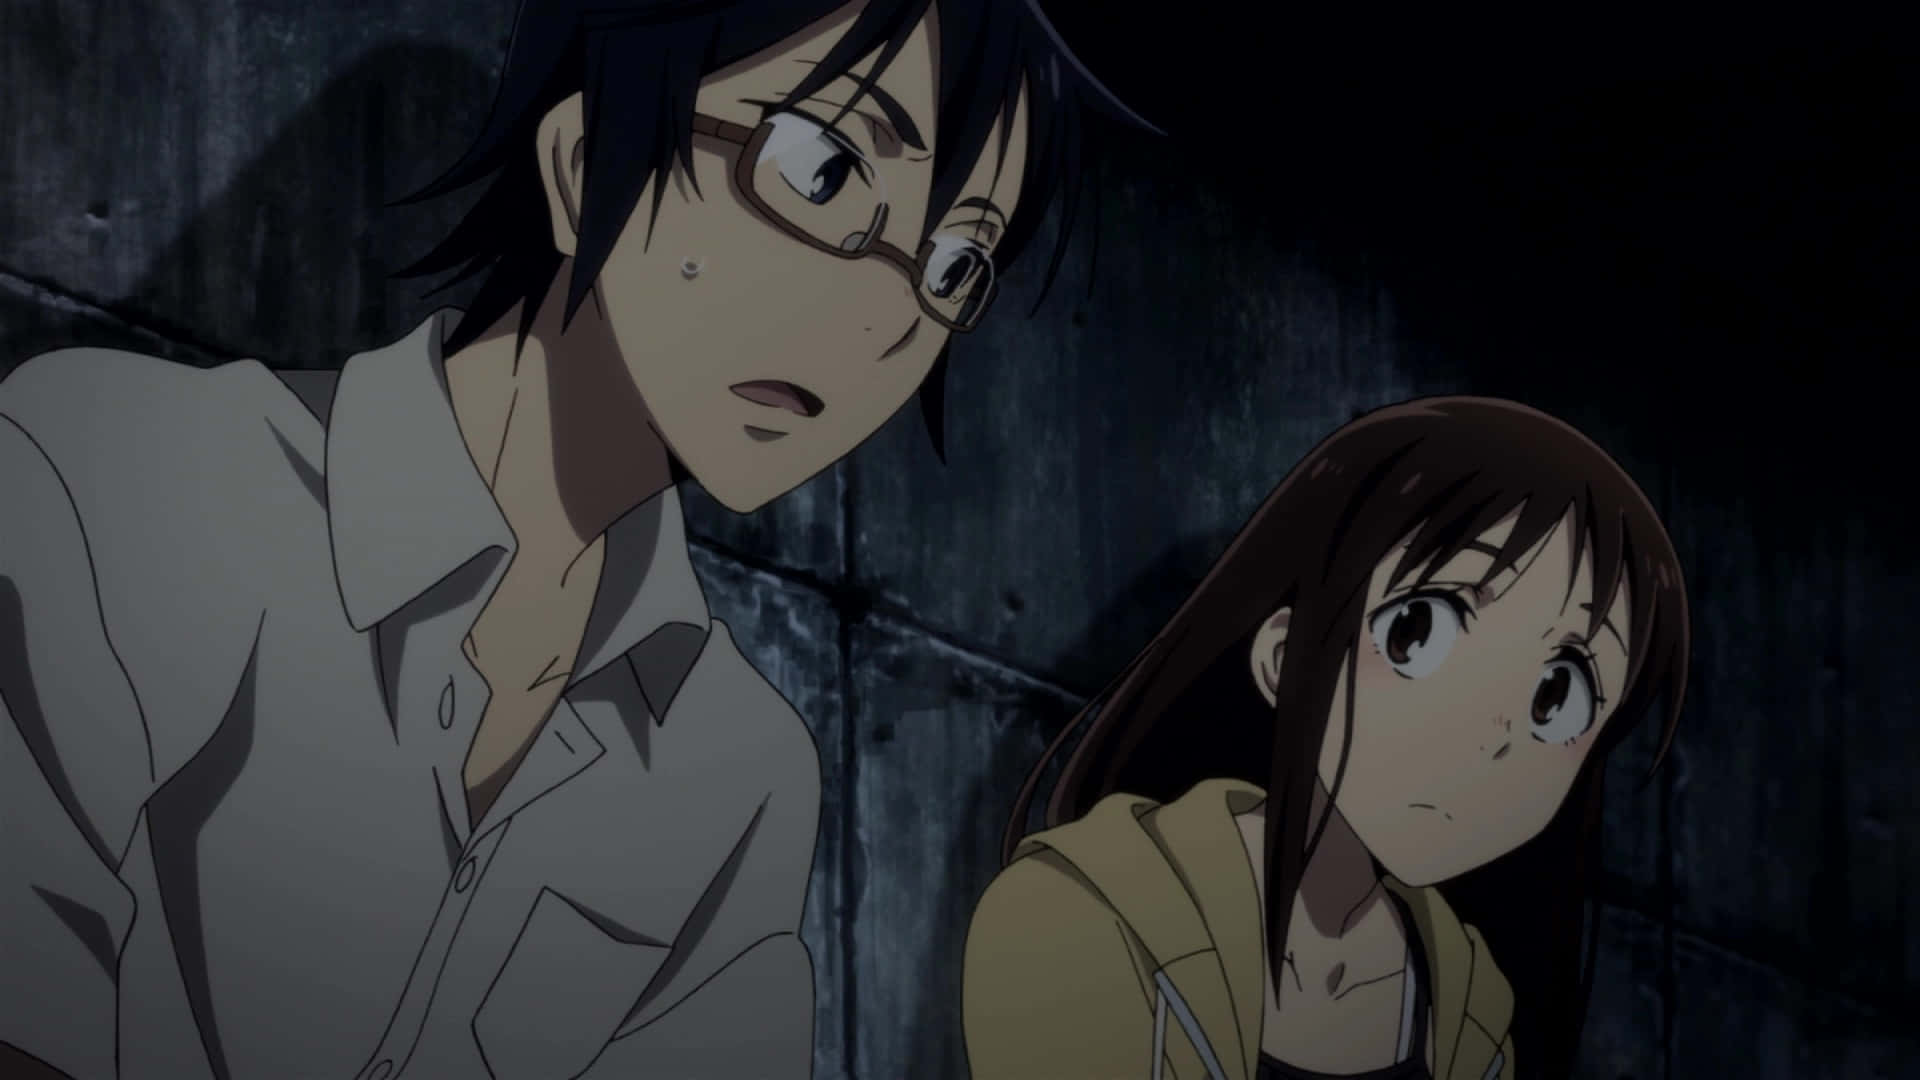 Erased Anime Ending Explained! Who Was The Real Killer?